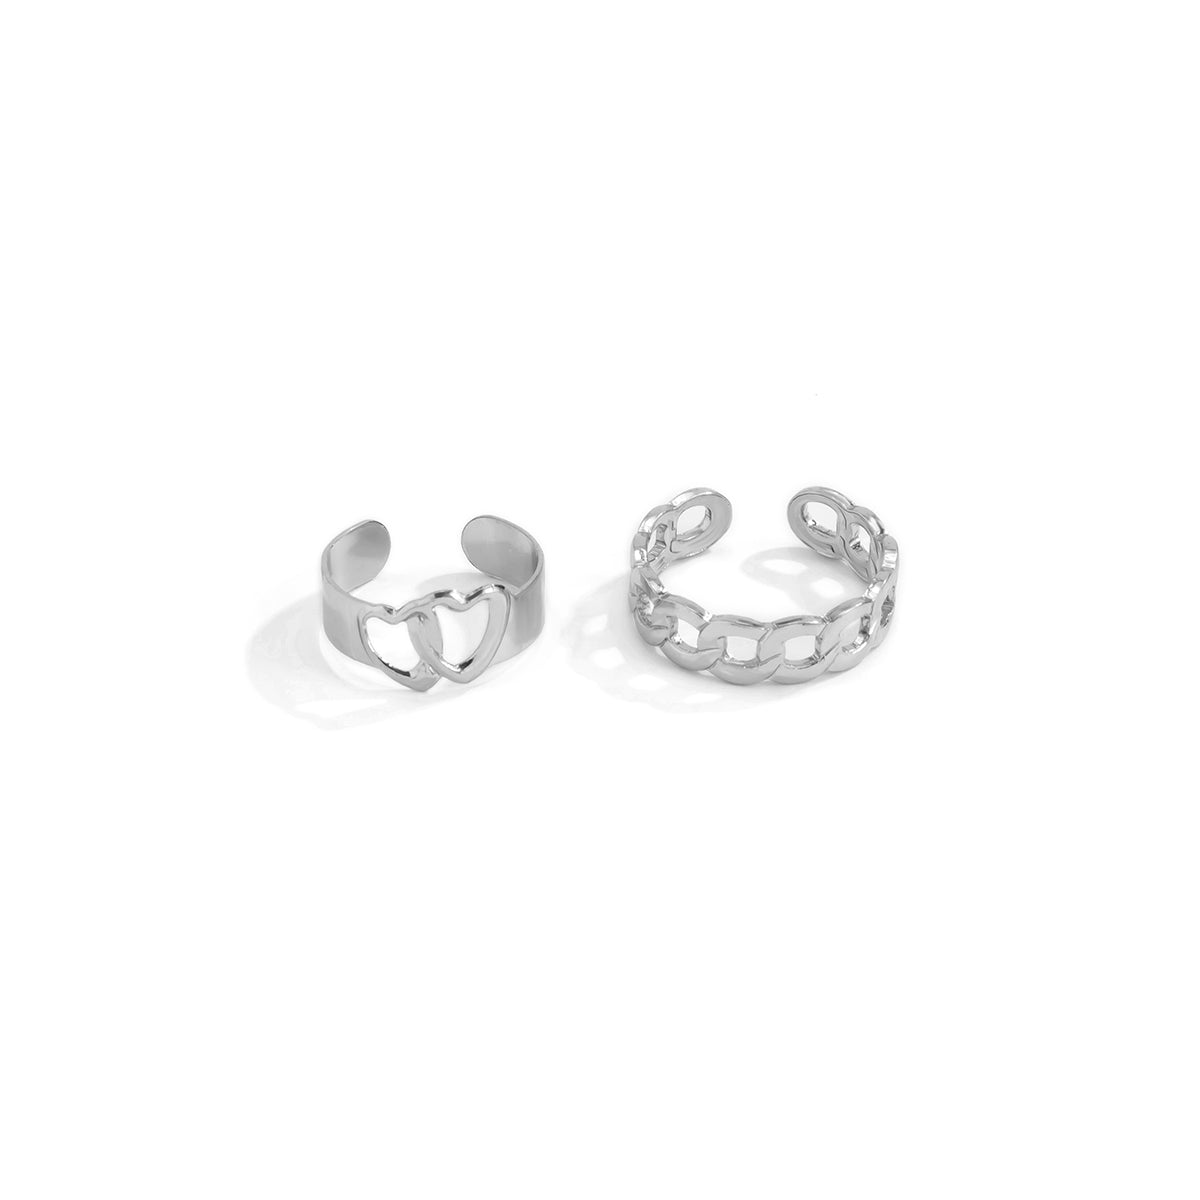 Silver-Plated Heart Link Adjustable Toe Ring Set